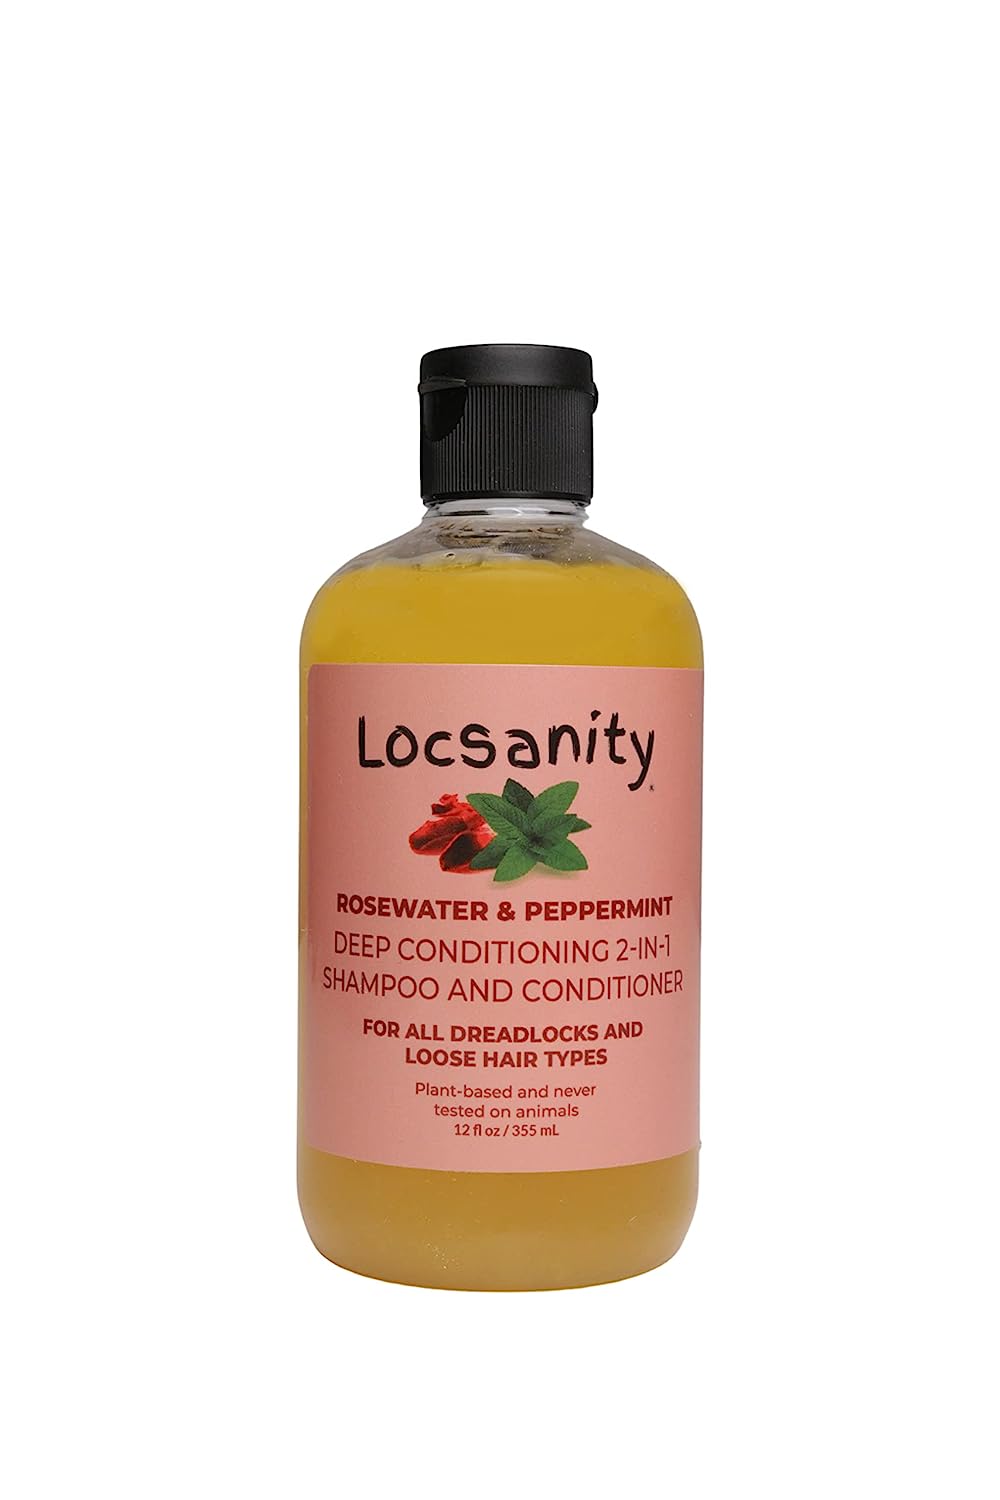 Locsanity Rosewater and Peppermint 2-1 Moisturizing [...]